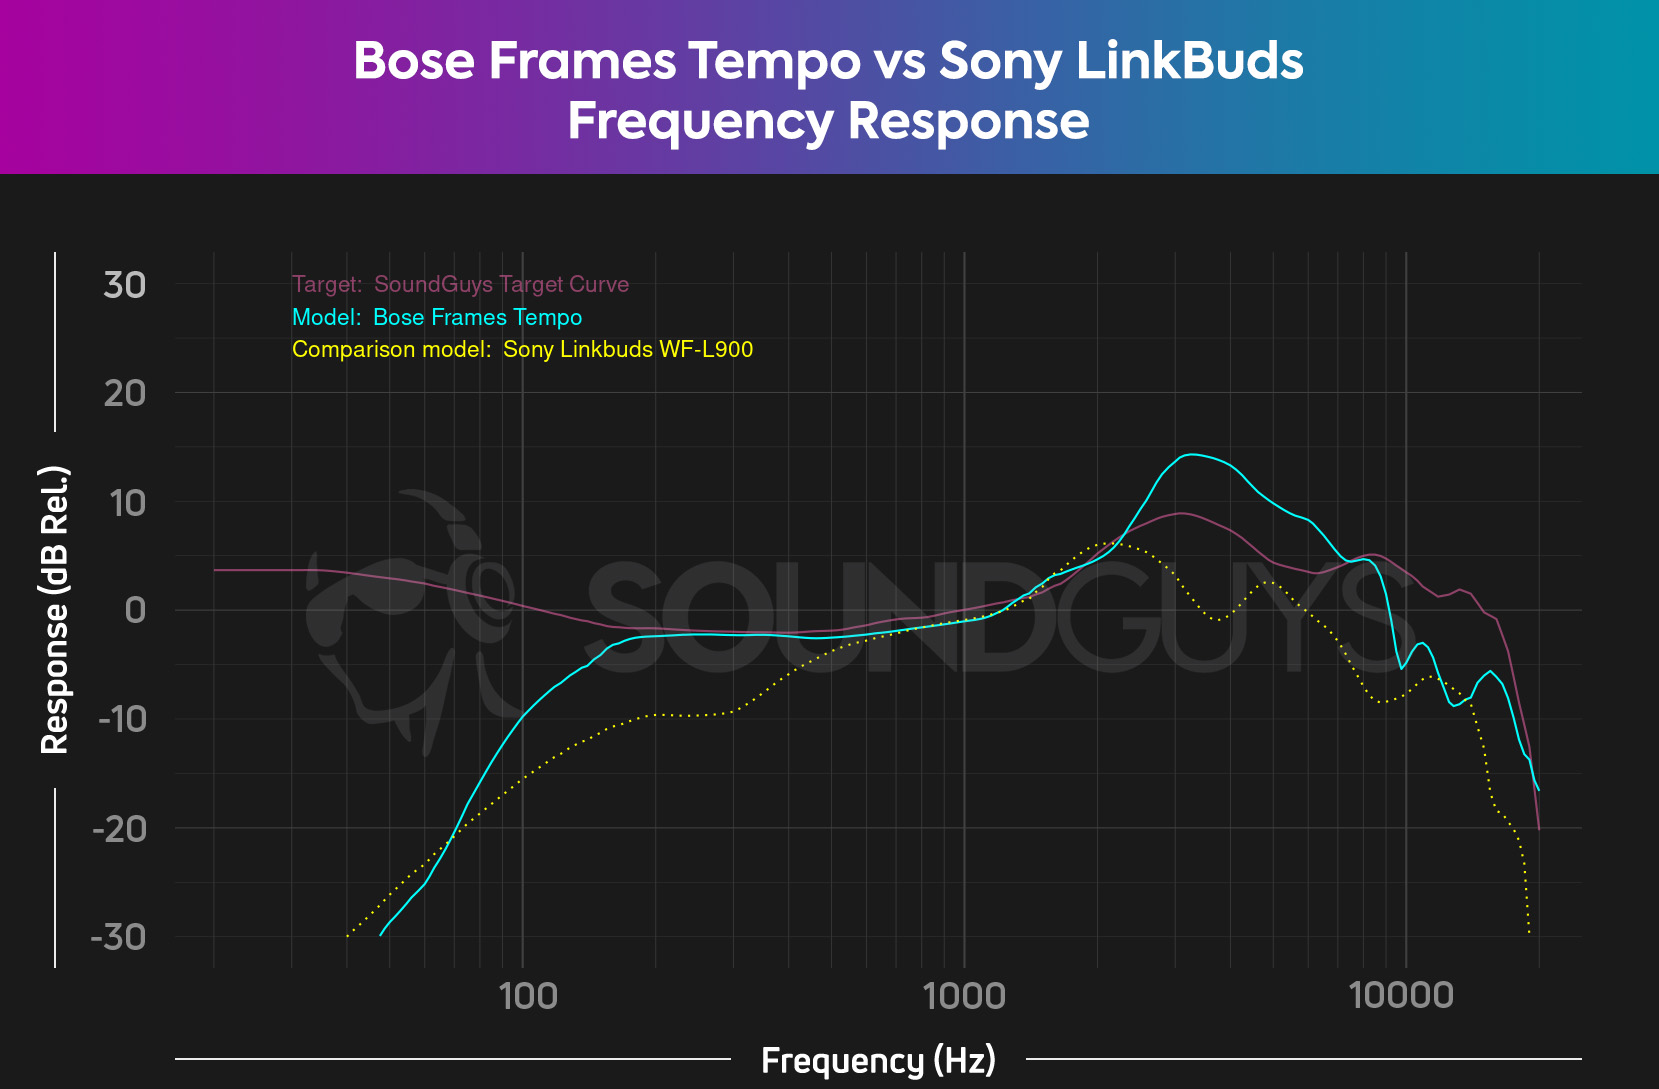 Bose Frames Tempo Frequency Response v s Sony Linkbuds: Sony has lesser performance